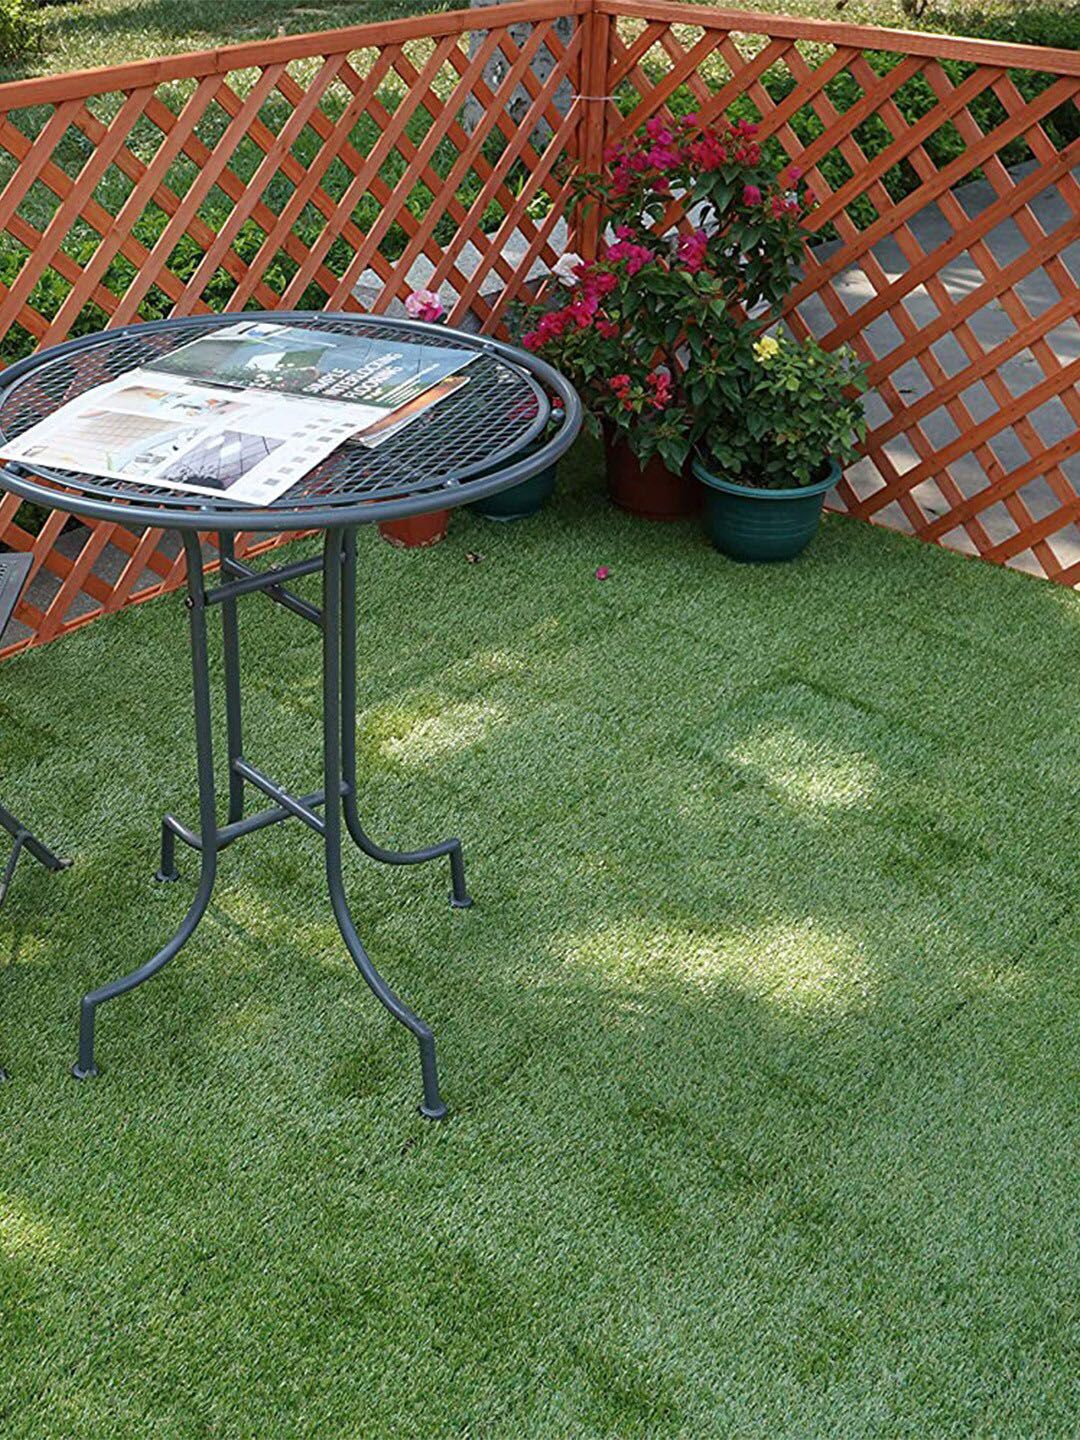 Sharpex Green 10 Pieces Artificial Grass Deck Tiles Price in India